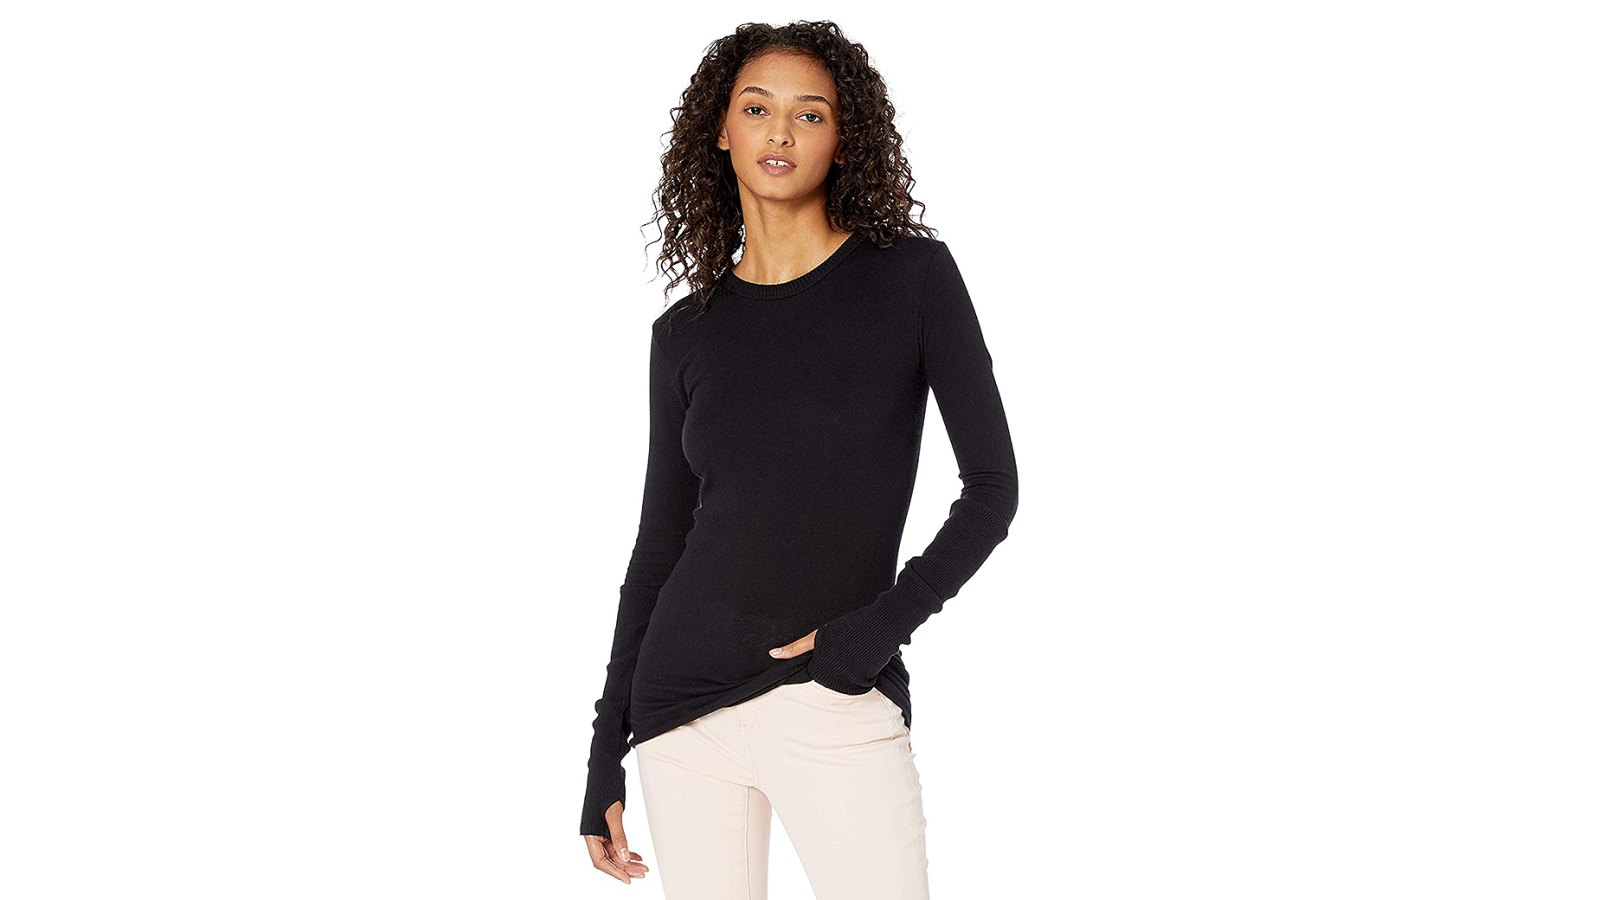 Enza Costa Cashmere-Blend Top Has the Cutest Thumbholes